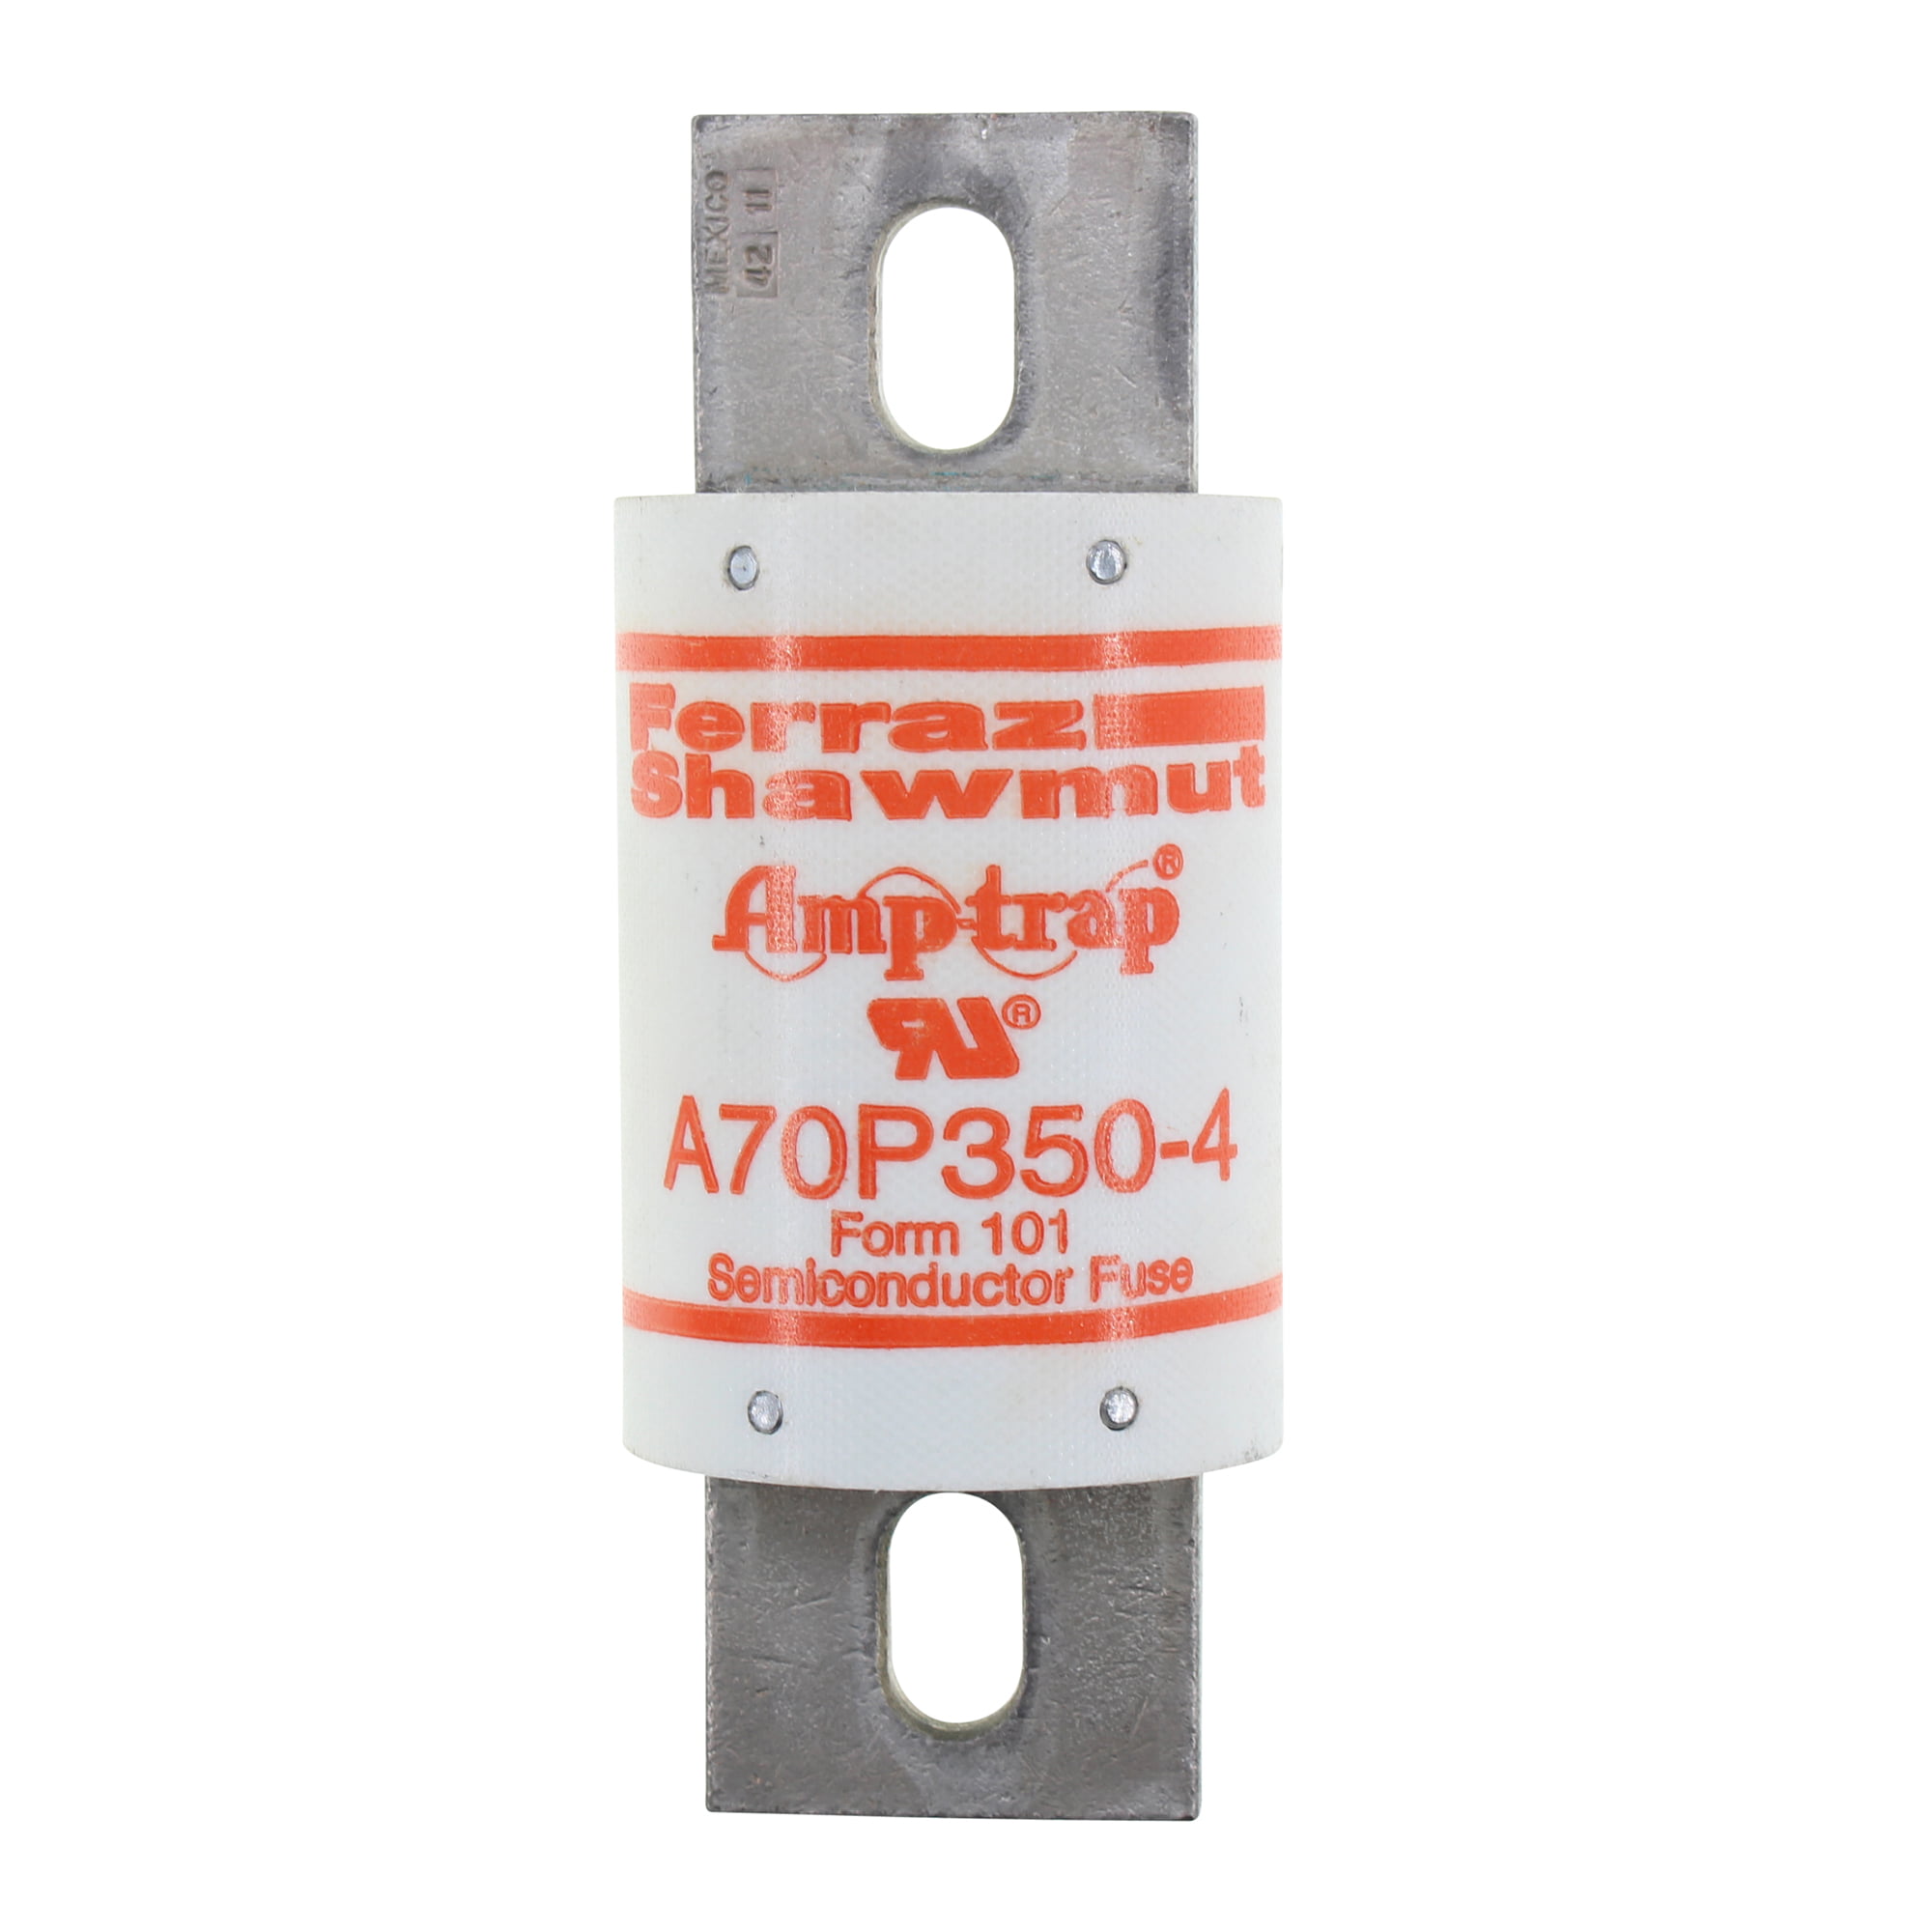 700VAC/650VDC 1-1/2 Diameter x 5-3/32 Length 100kA AC/100kA DC 125 Ampere Mersen A70P Amp-Trap Form 101 Semiconductor Protection Fuse with Trigger Actuator